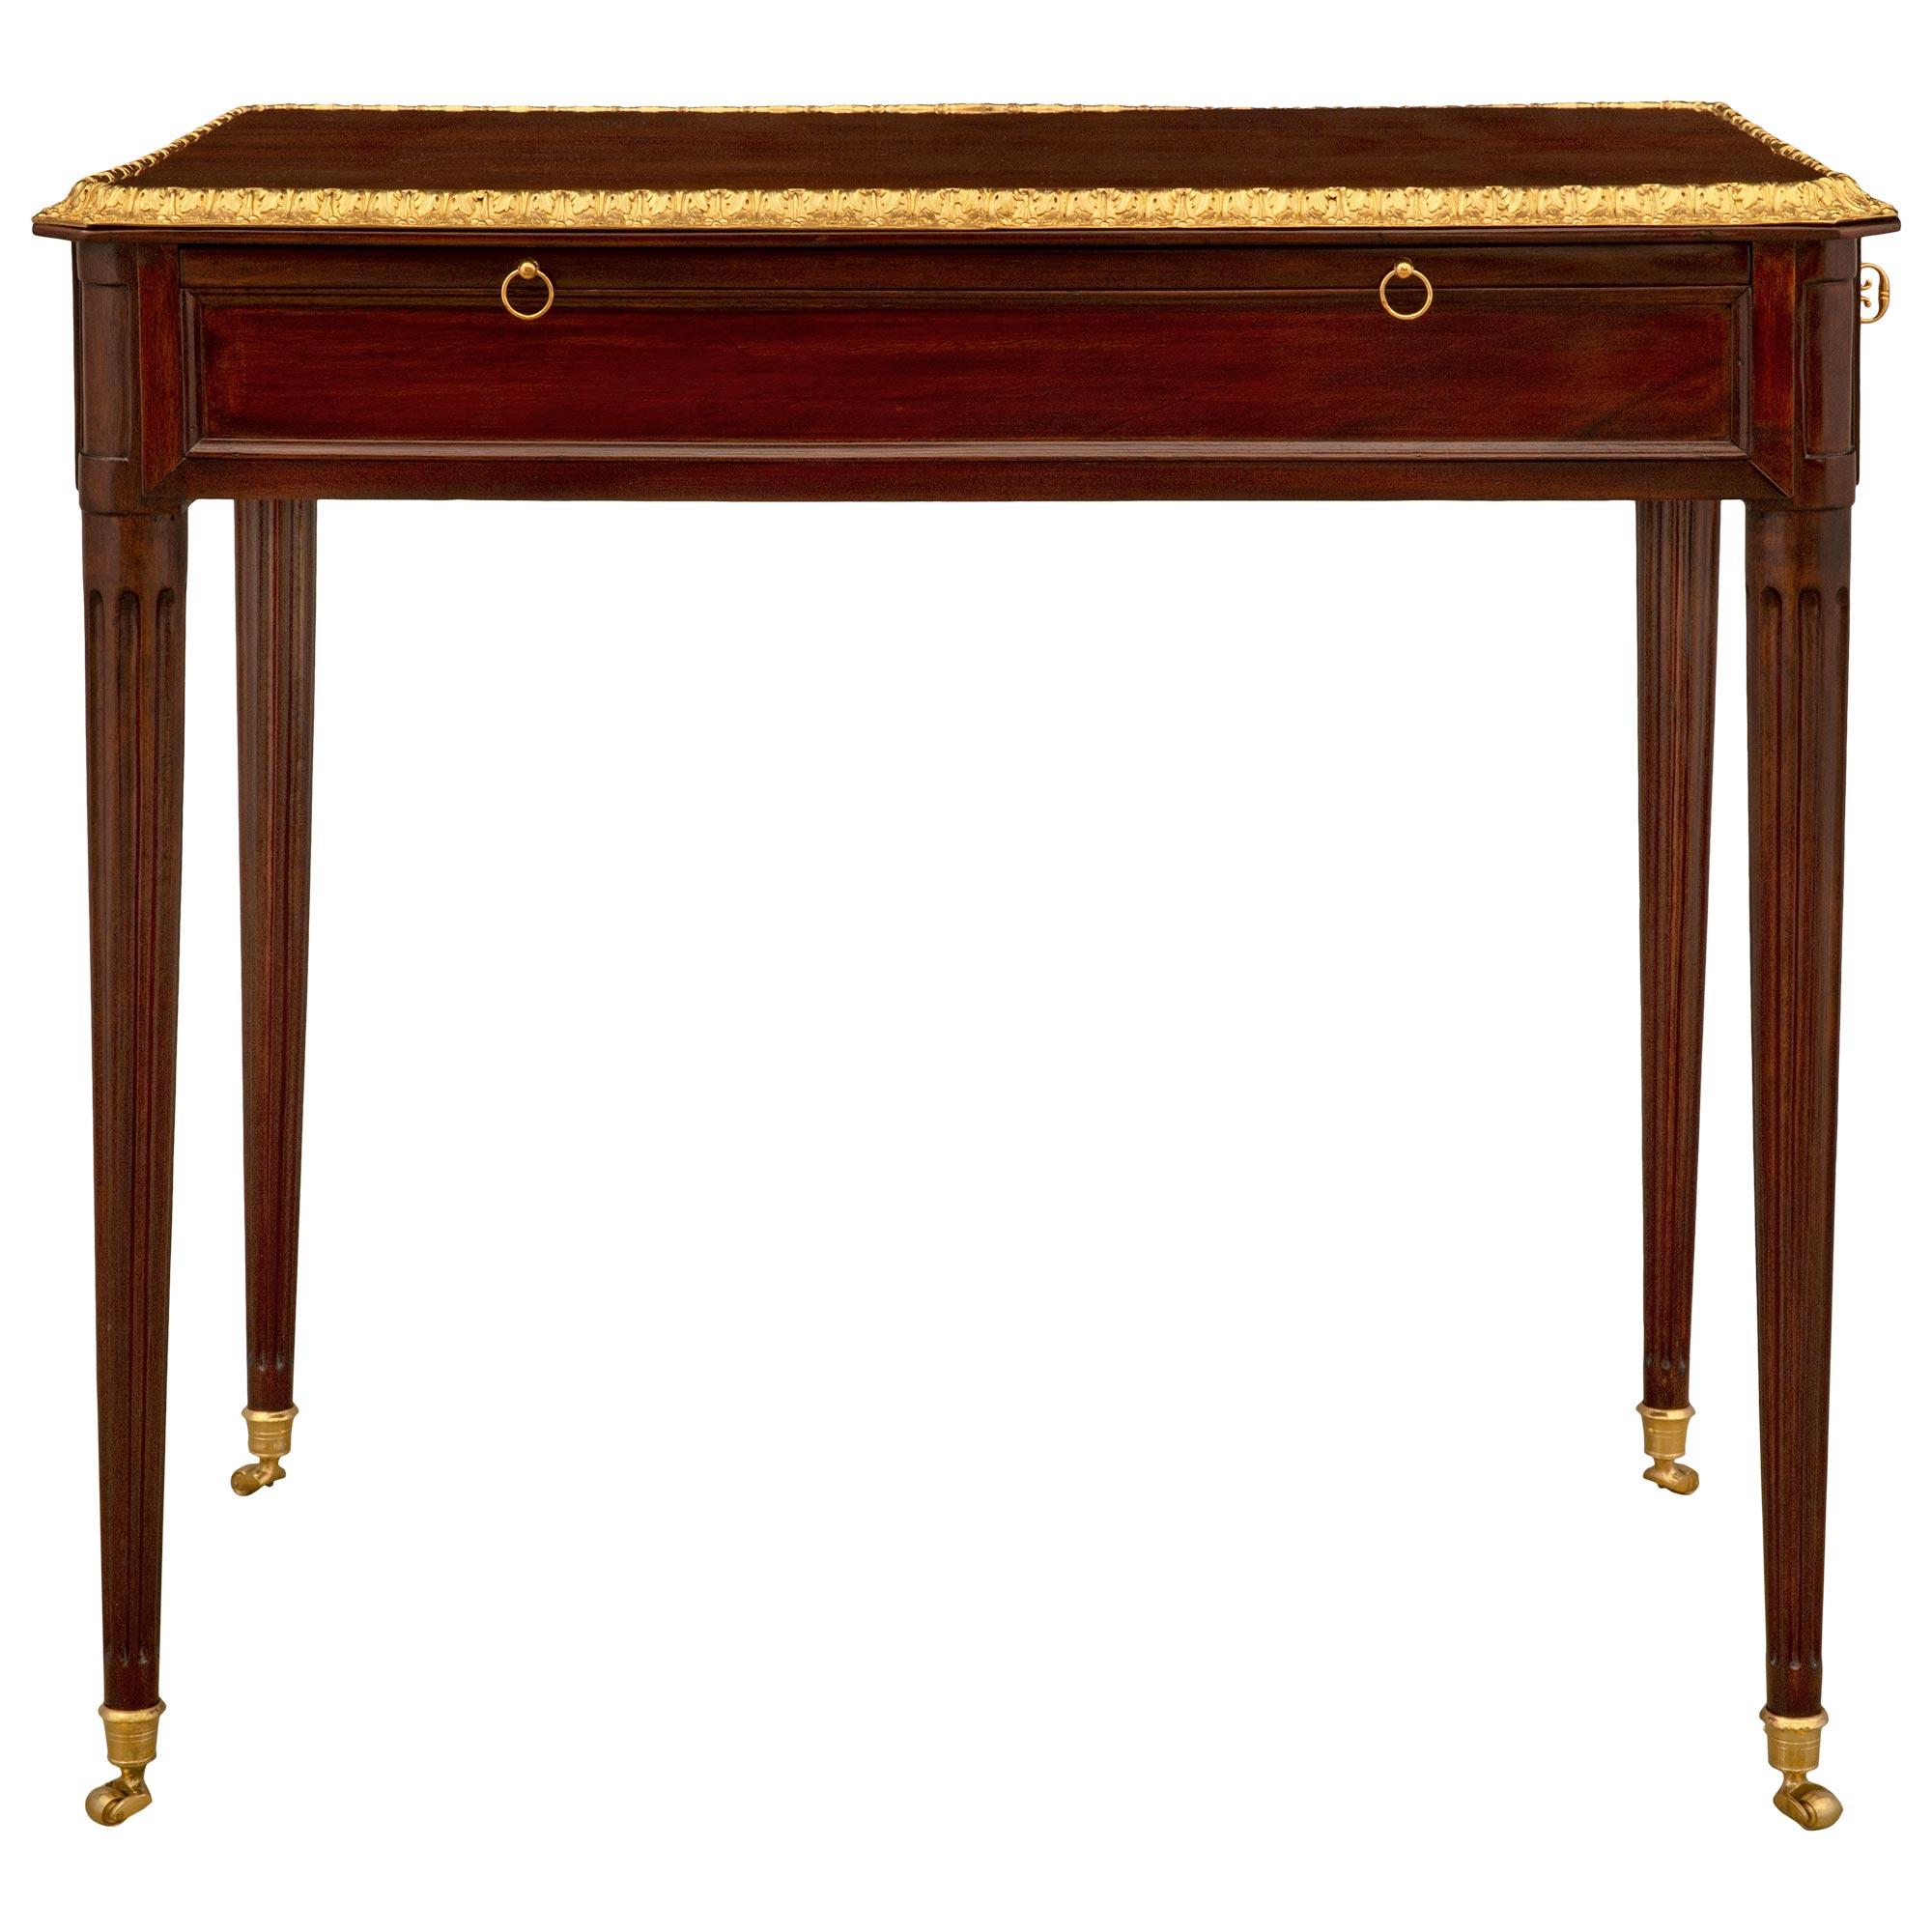 French 18th Century Louis XVI Period Mahogany and Ormolu Side Table / Desk